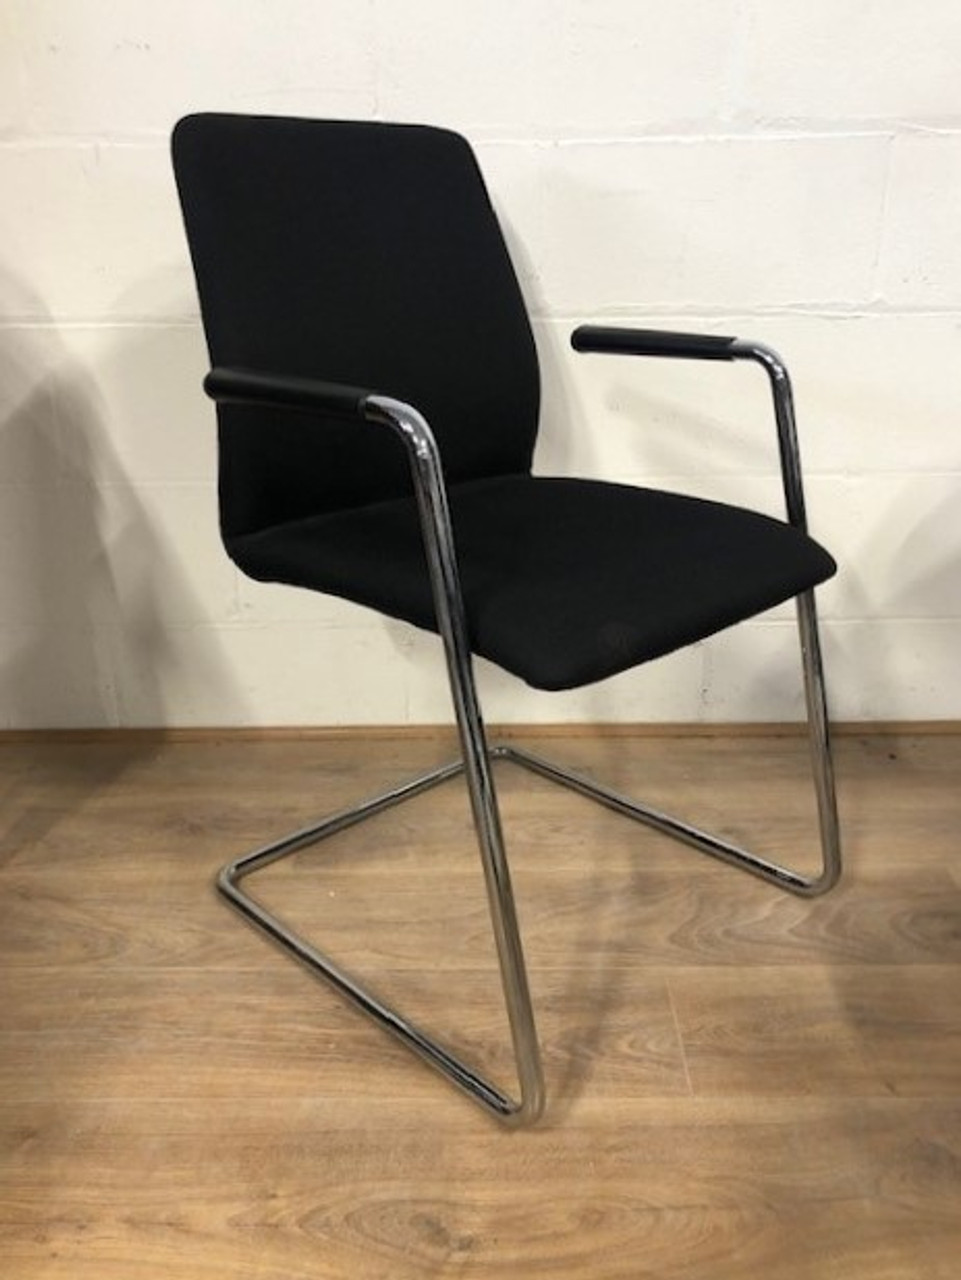 2nd hand office furniture essex_used office chairs essex_second hand sven chairs chelmsford